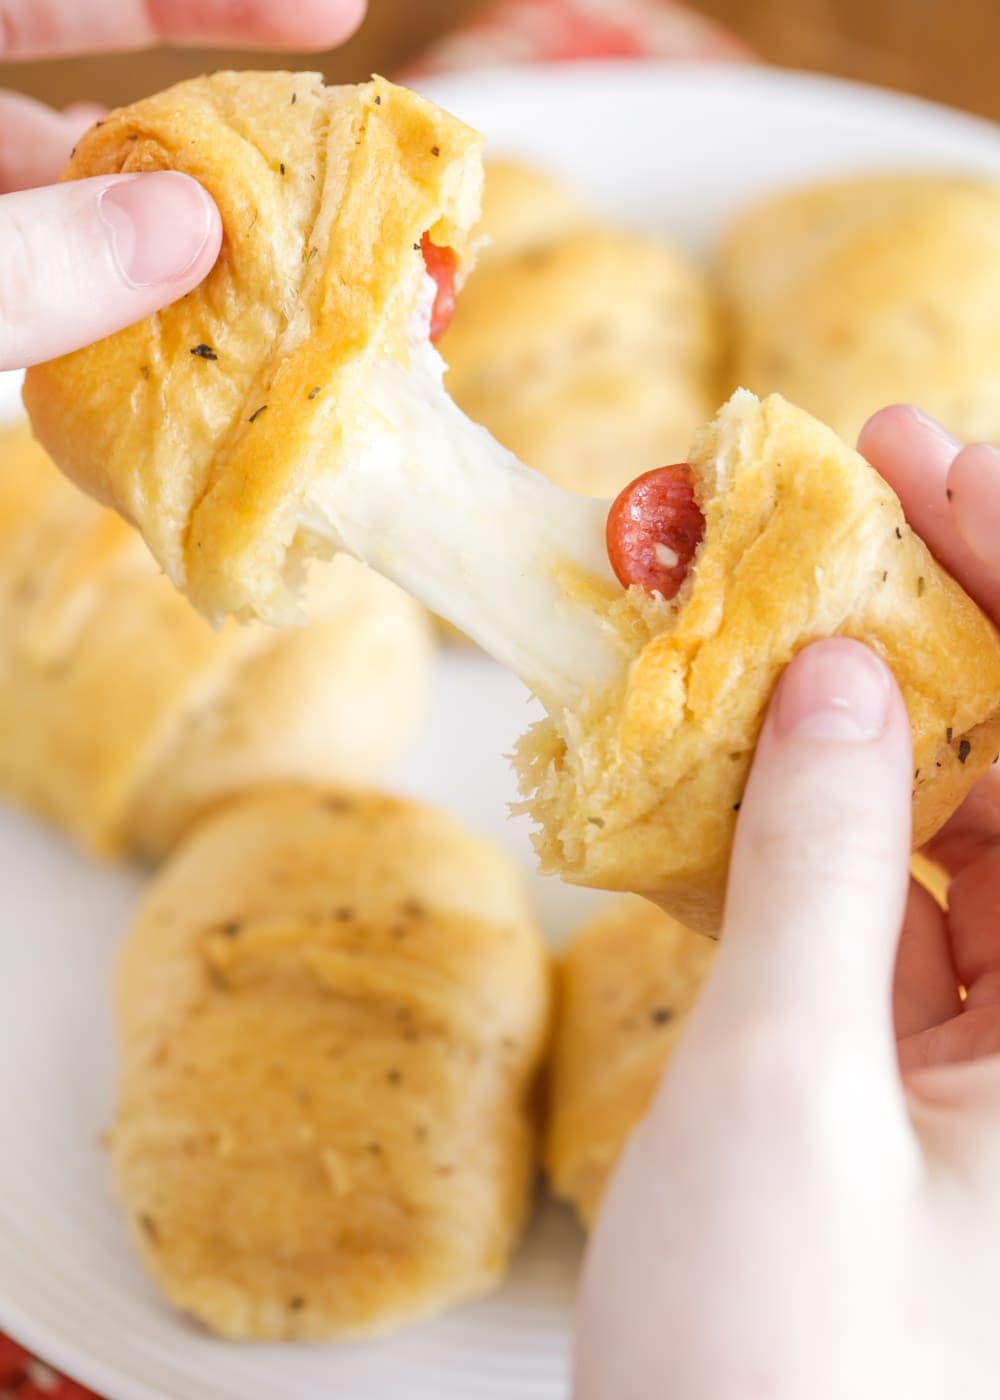 Breaking apart a crescent roll pizza roll up.